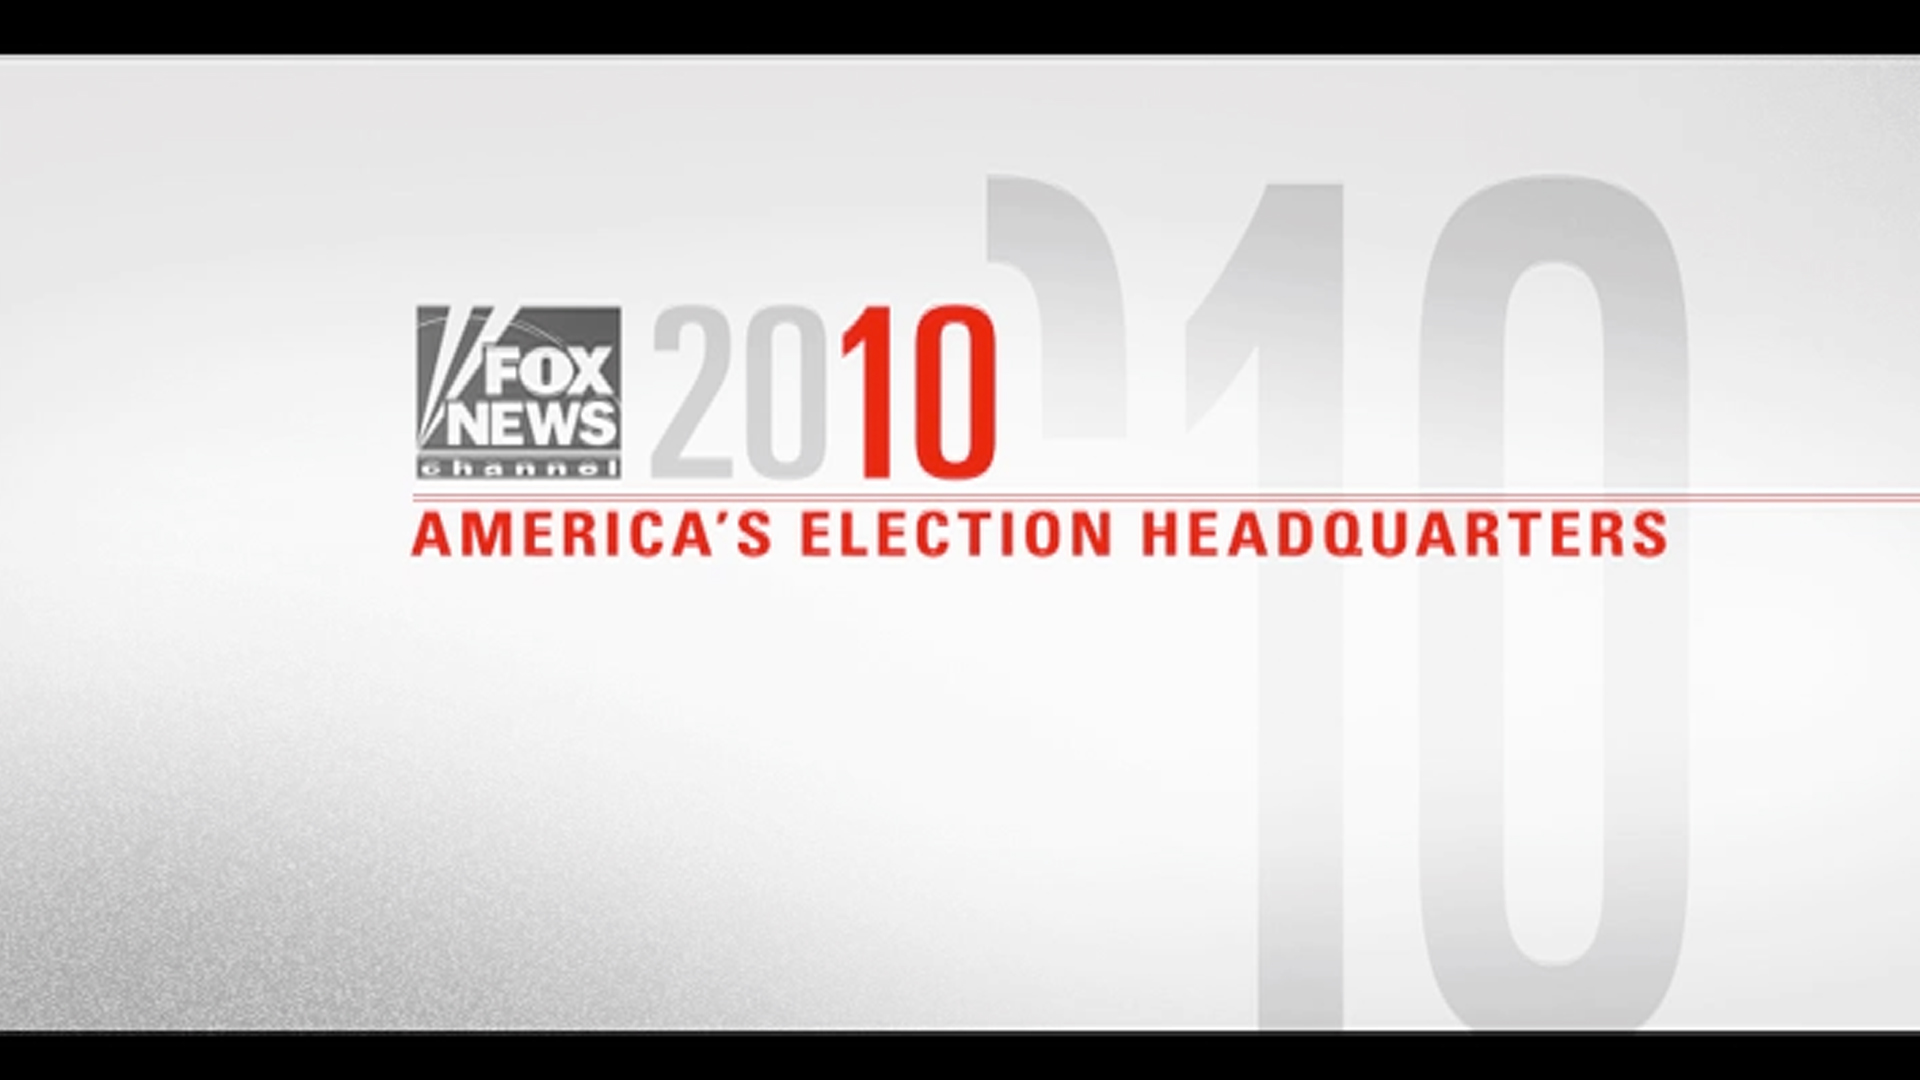 National Television Commercial - We're Everywhere Political Campaign. Fox News Channel 2010.